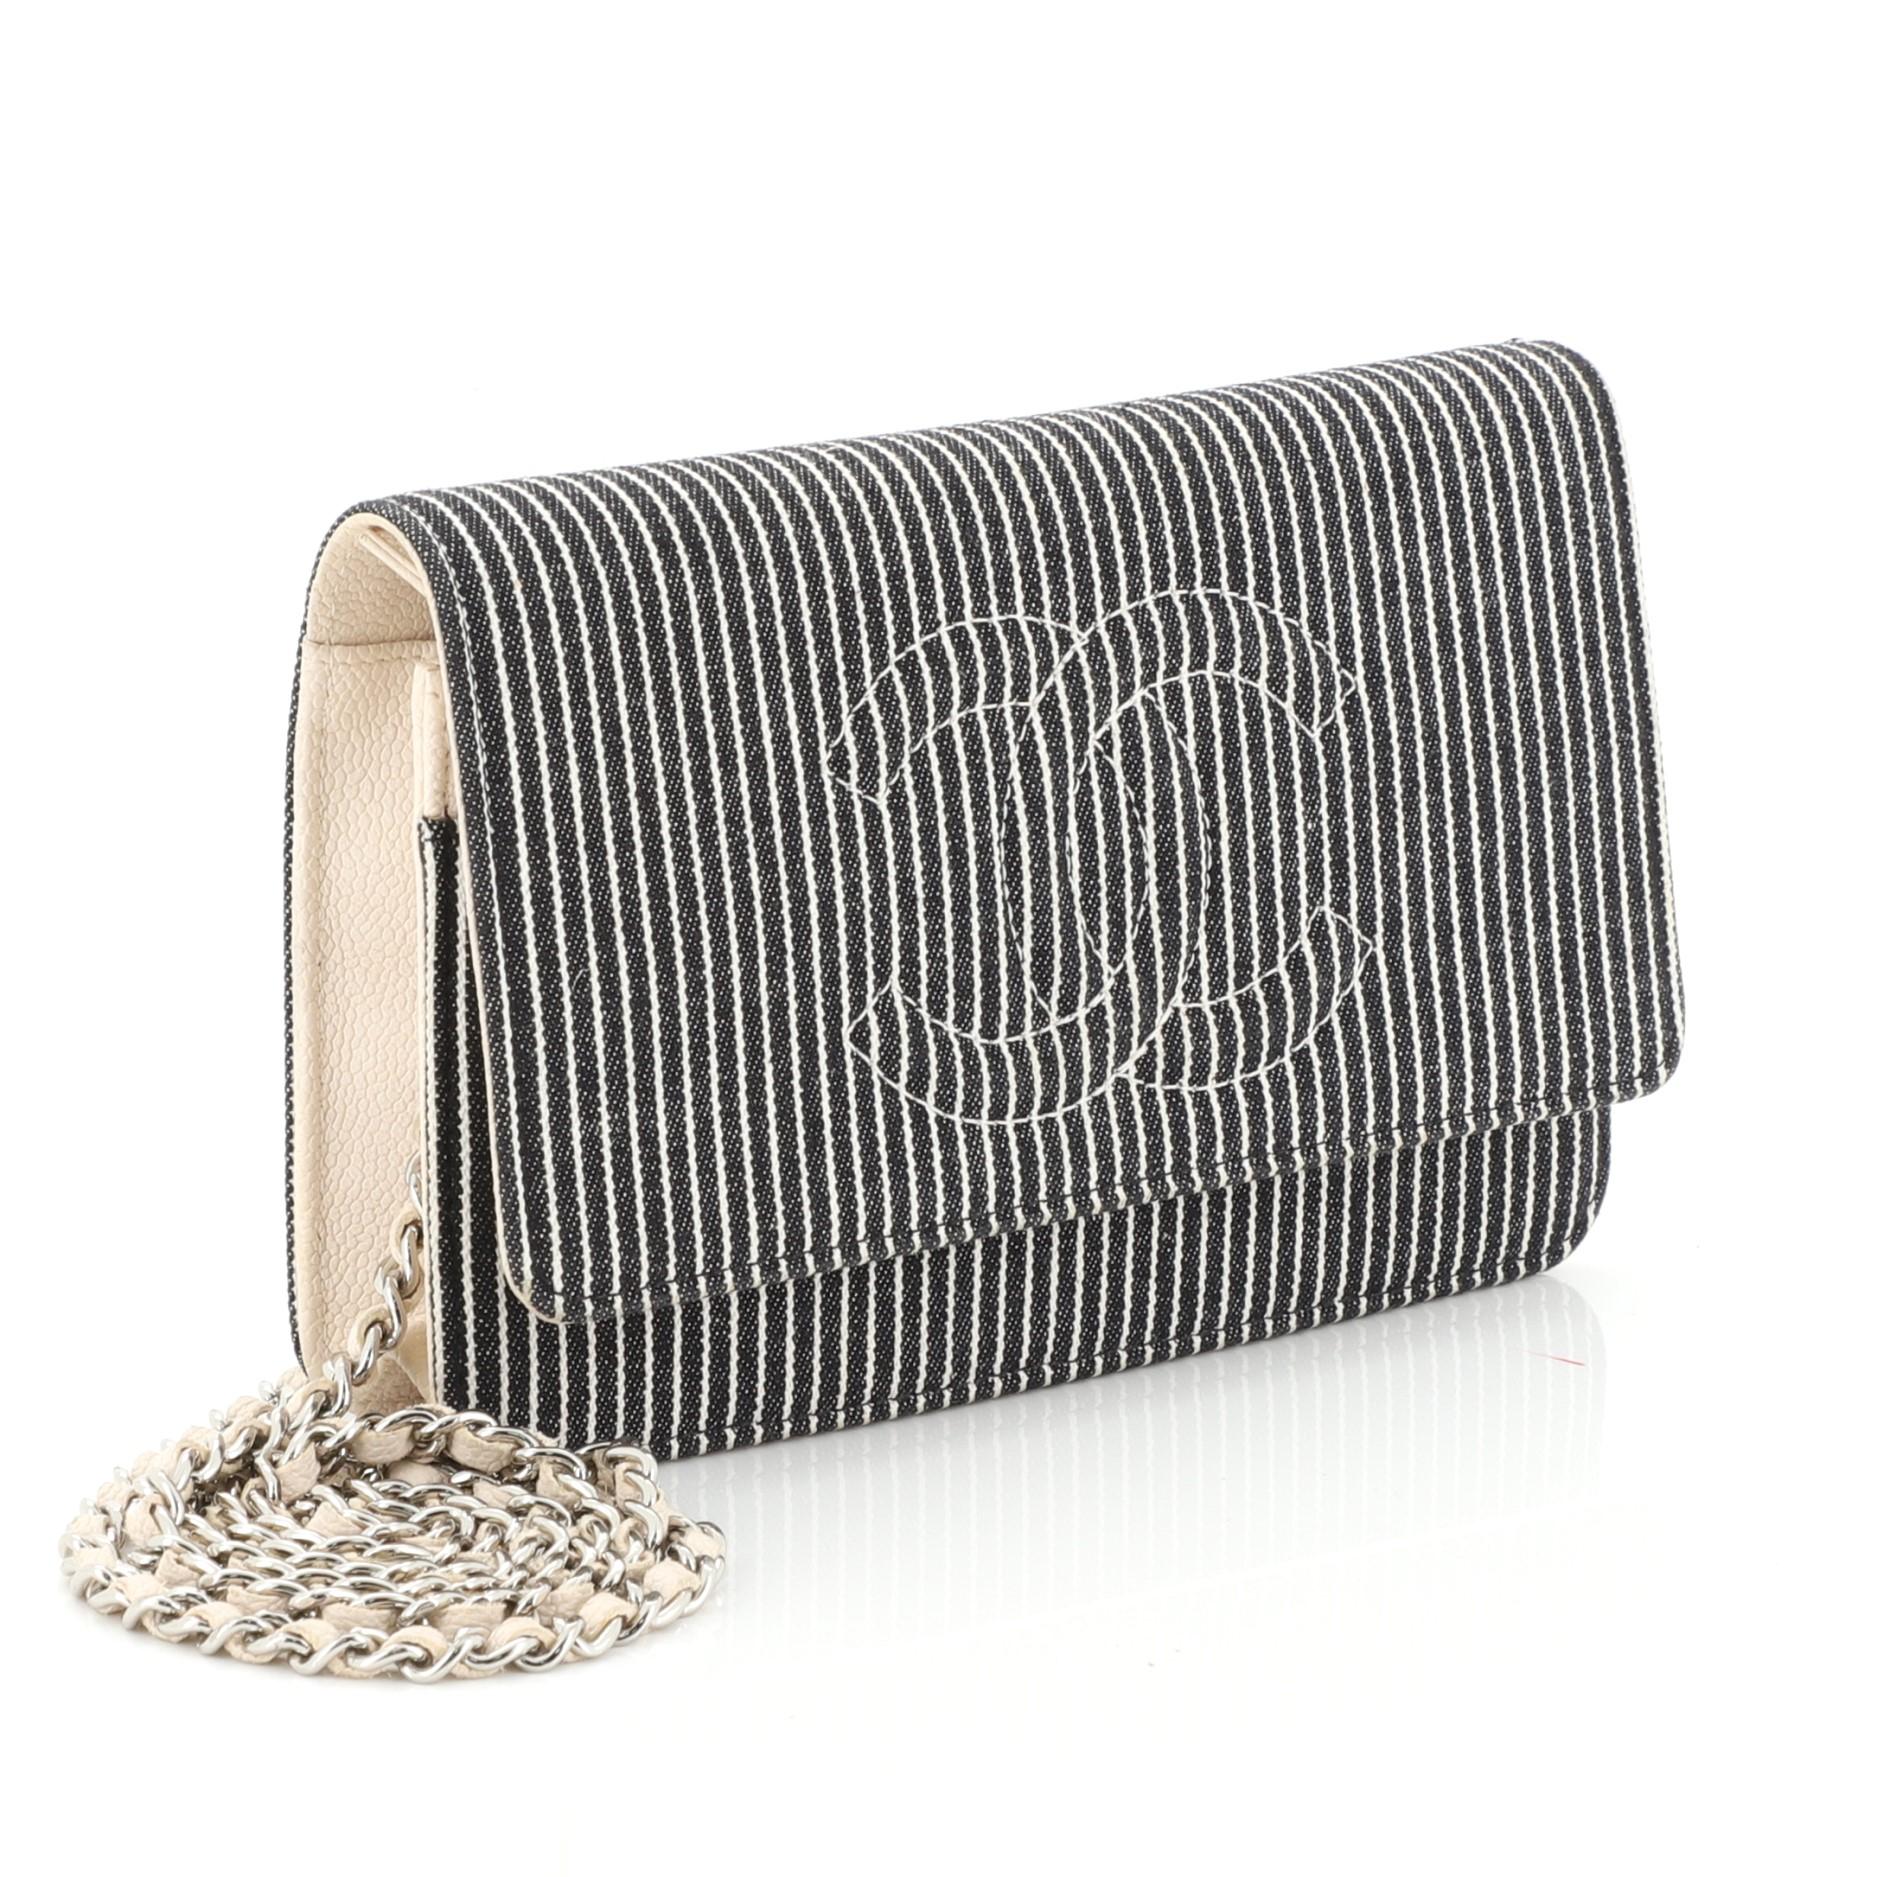 This Chanel Timeless Wallet on Chain Striped Denim, crafted in black striped denim, features woven-in leather chain strap, interlocking CC logo stitched on front and silver-tone hardware. Its snap button closure opens to a neutral fabric and leather